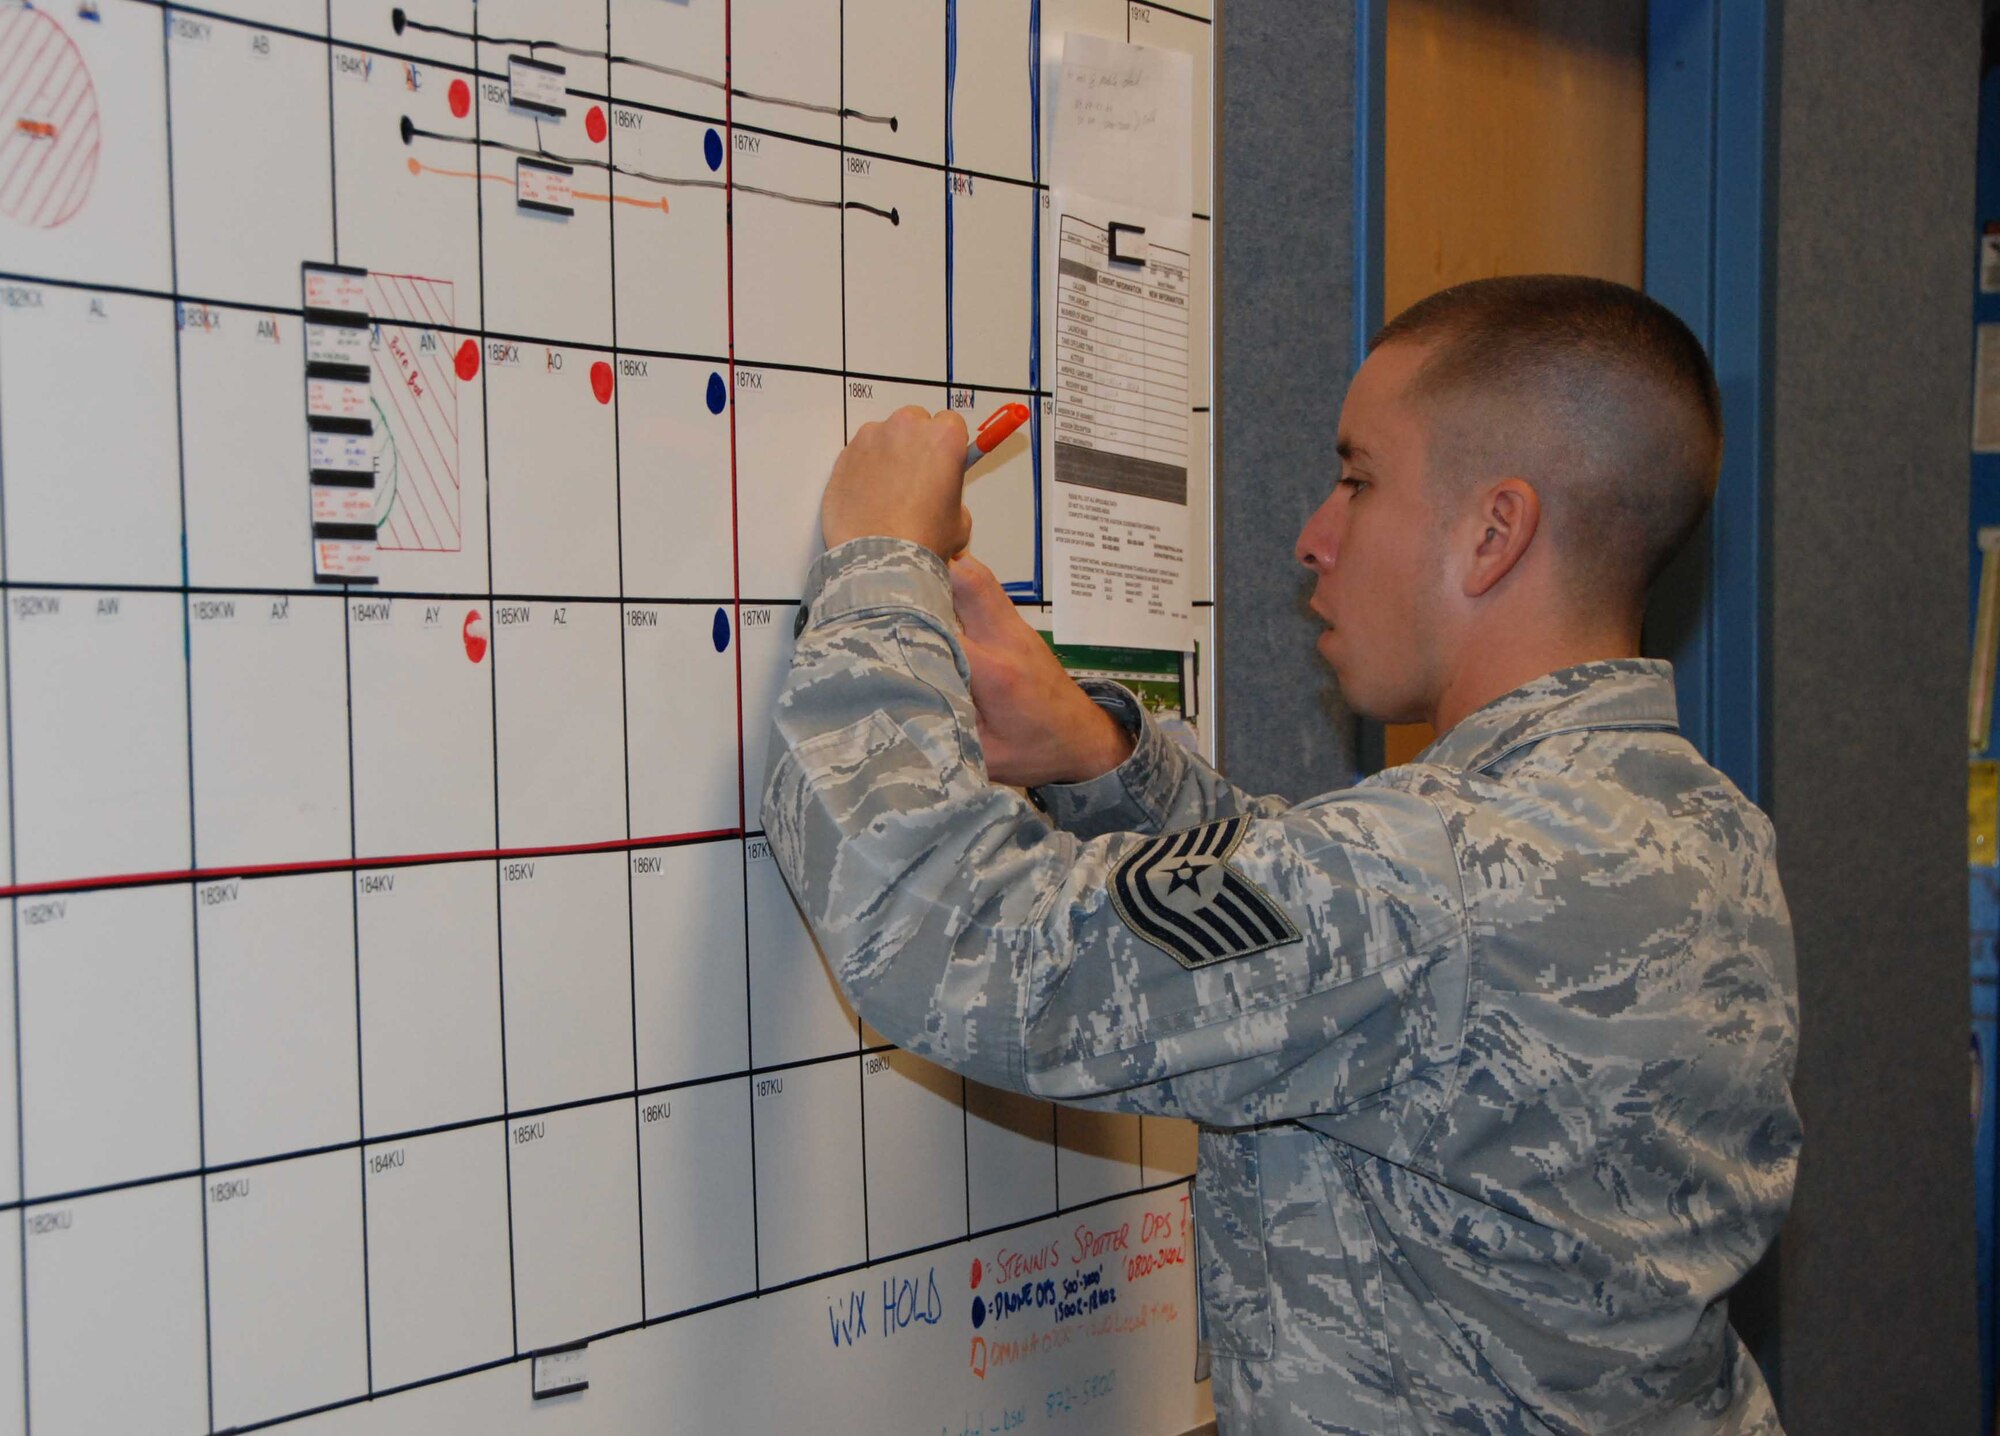 Tech. Sgt. Charles Holbert, Aviation Coordination Command airspace manager, charts and collates airspace information on the numerous air-based platforms that are operating in the temporary flight restriction area over the Deepwater Horizon oil spill.  The Aviation Coordination Command is operating out of the 601st Air & Space Operations Center at Tyndall AFB, Fla.